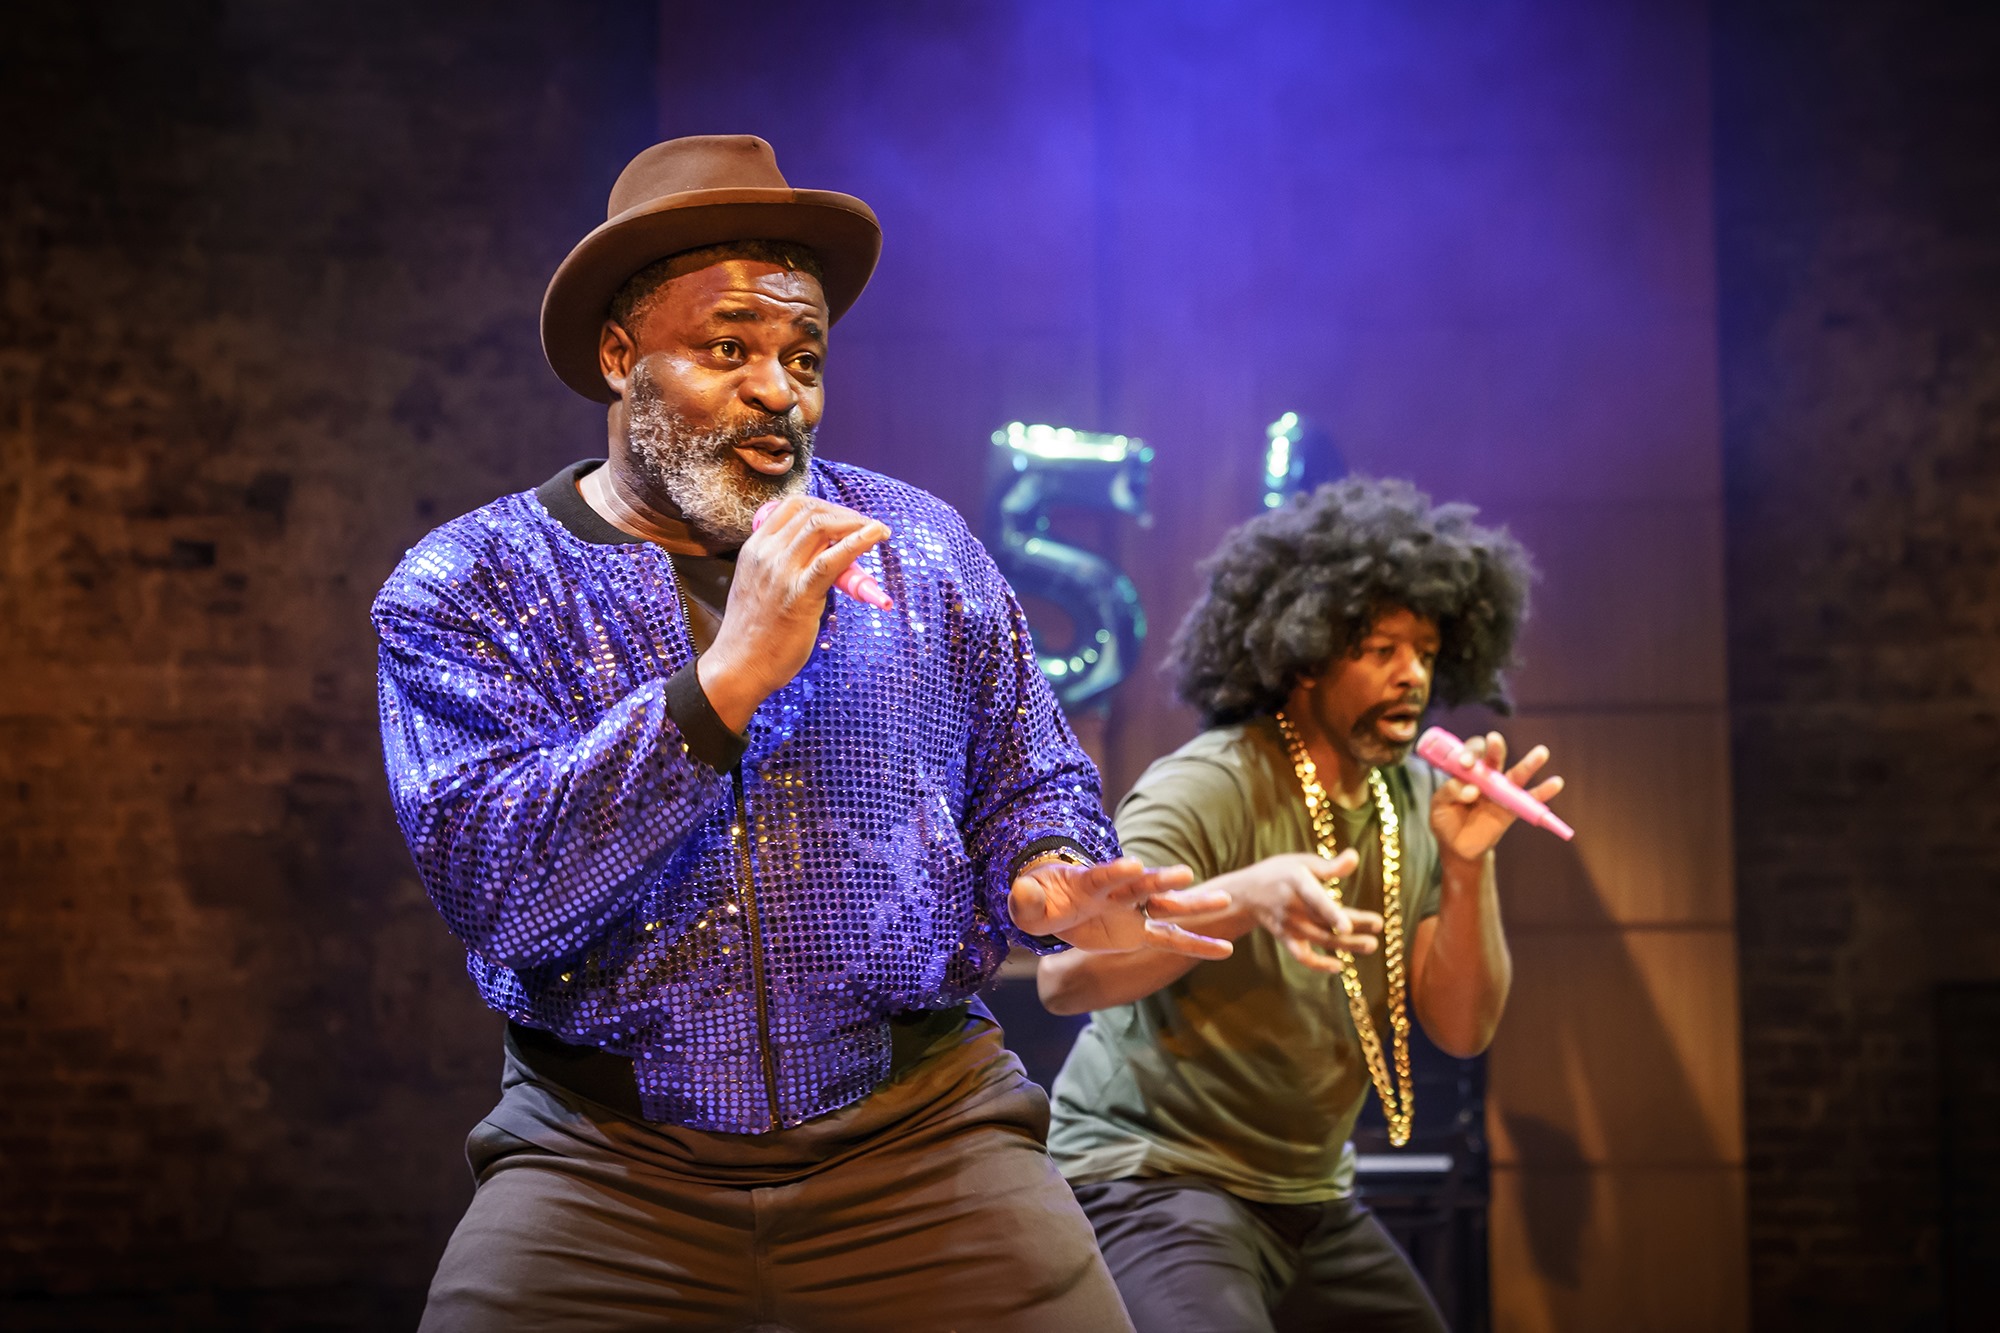 Hymn at the Almeida. Adrian Lester and Danny Sapani. Photo credit - Marc Brenner